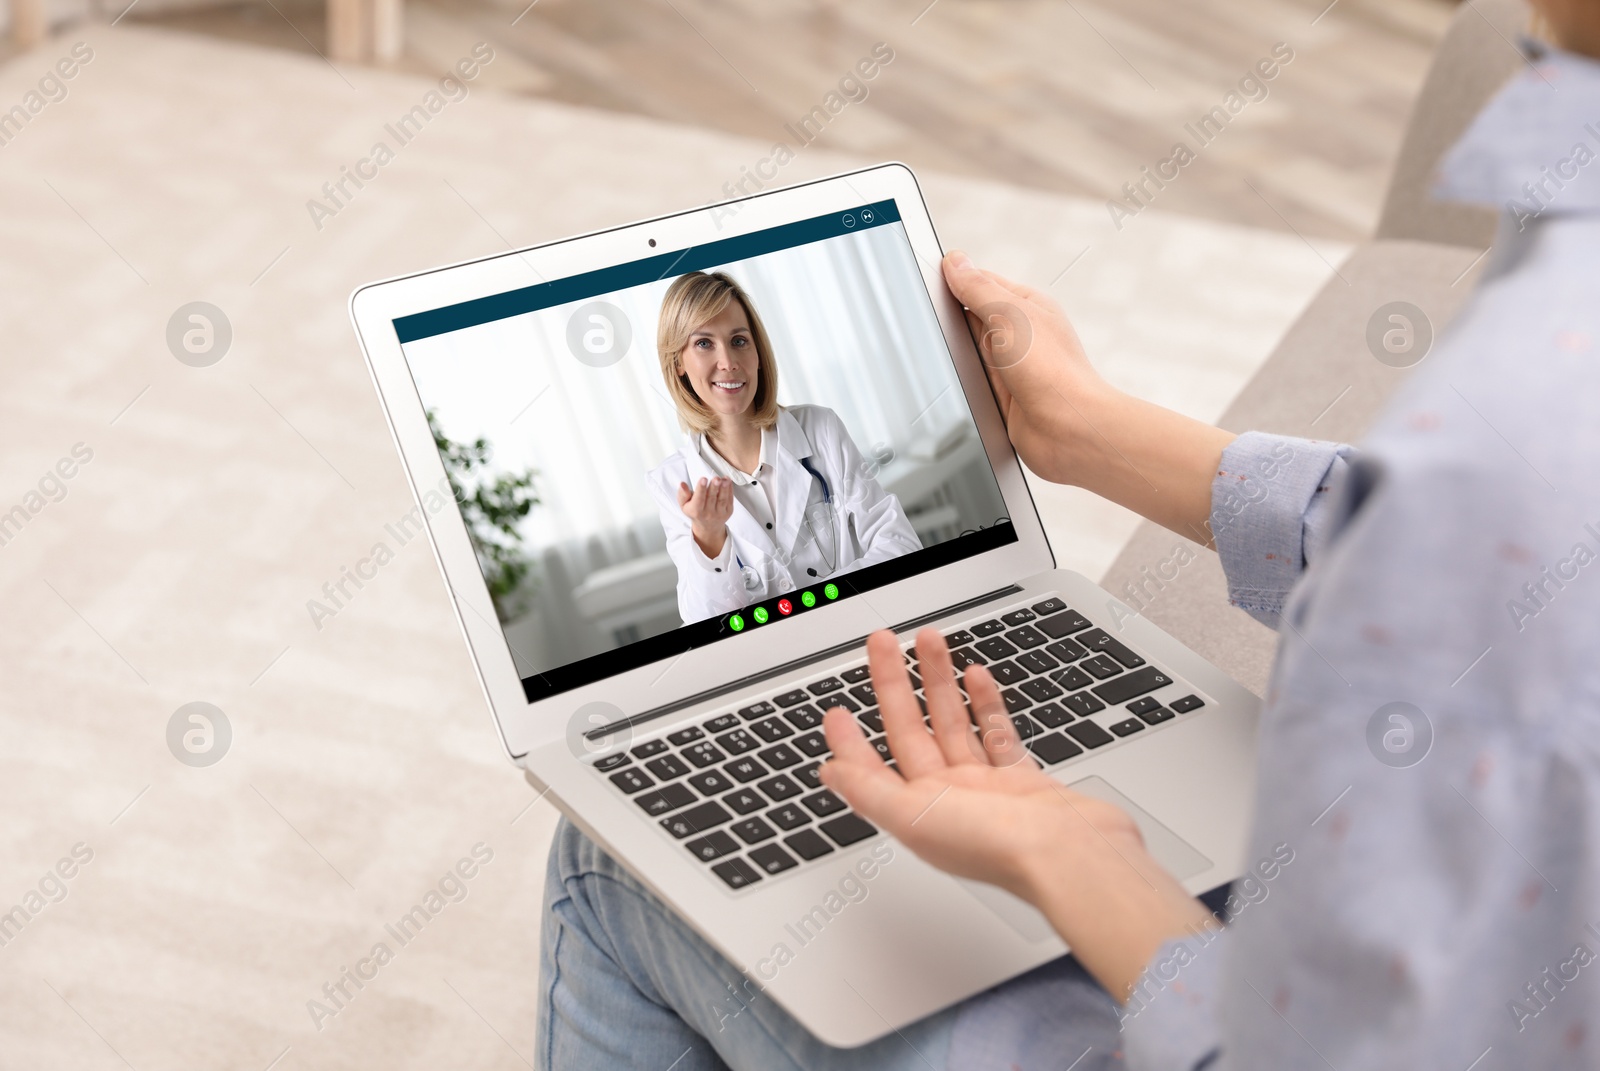 Image of Online medical consultation. Woman having video chat with doctor via laptop at home, closeup